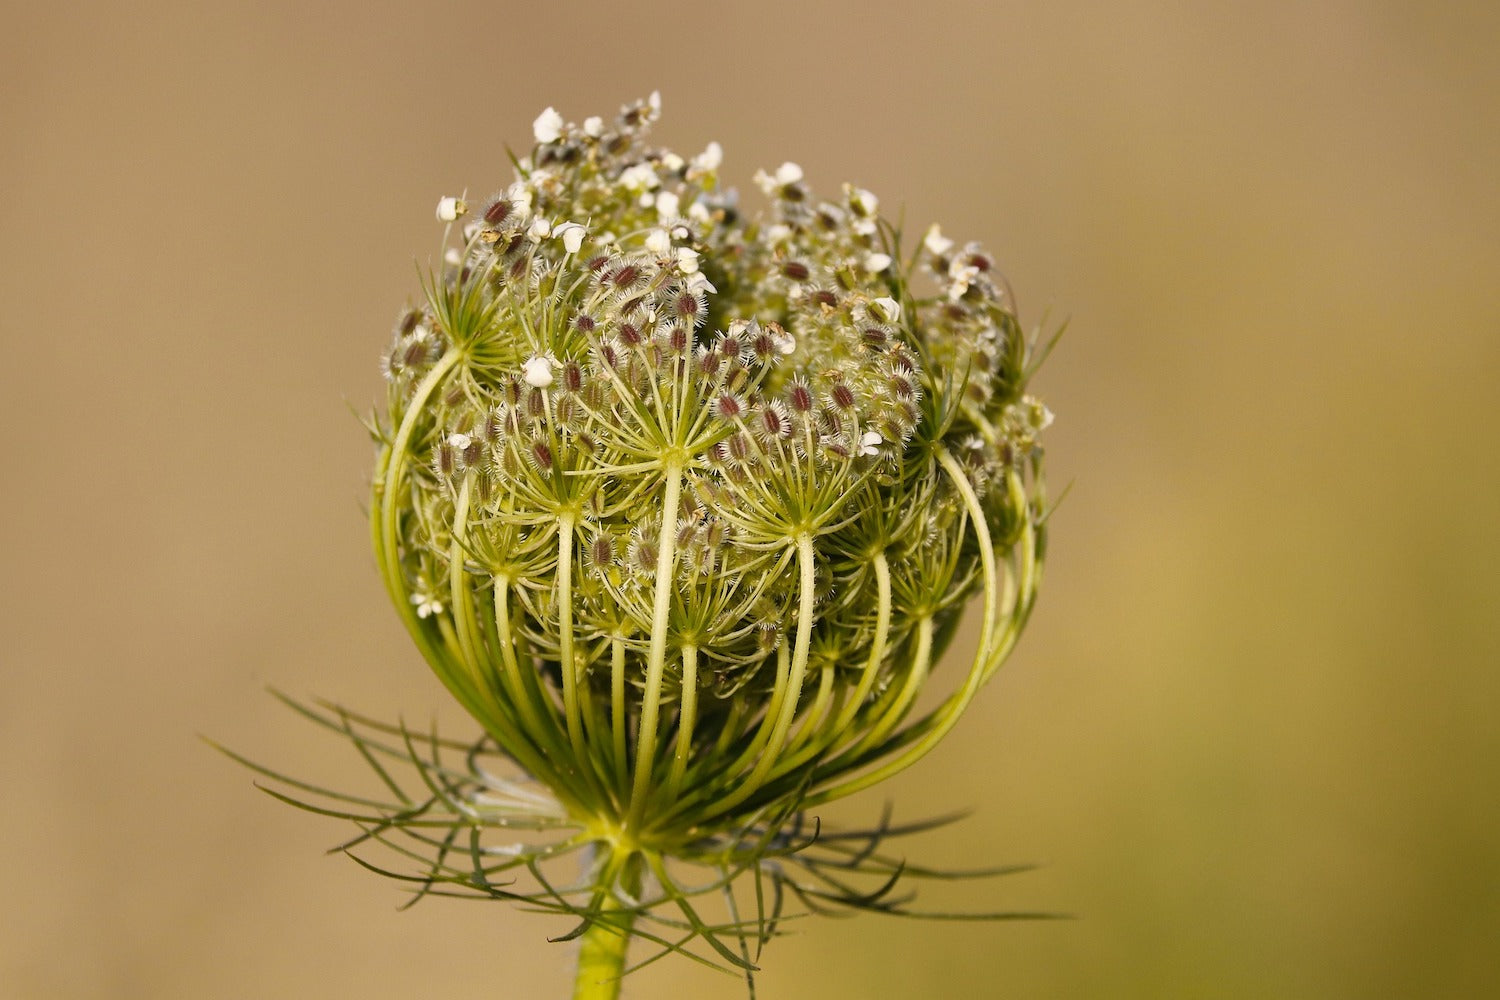 The wild carrot curls up towards the middle when it has withered